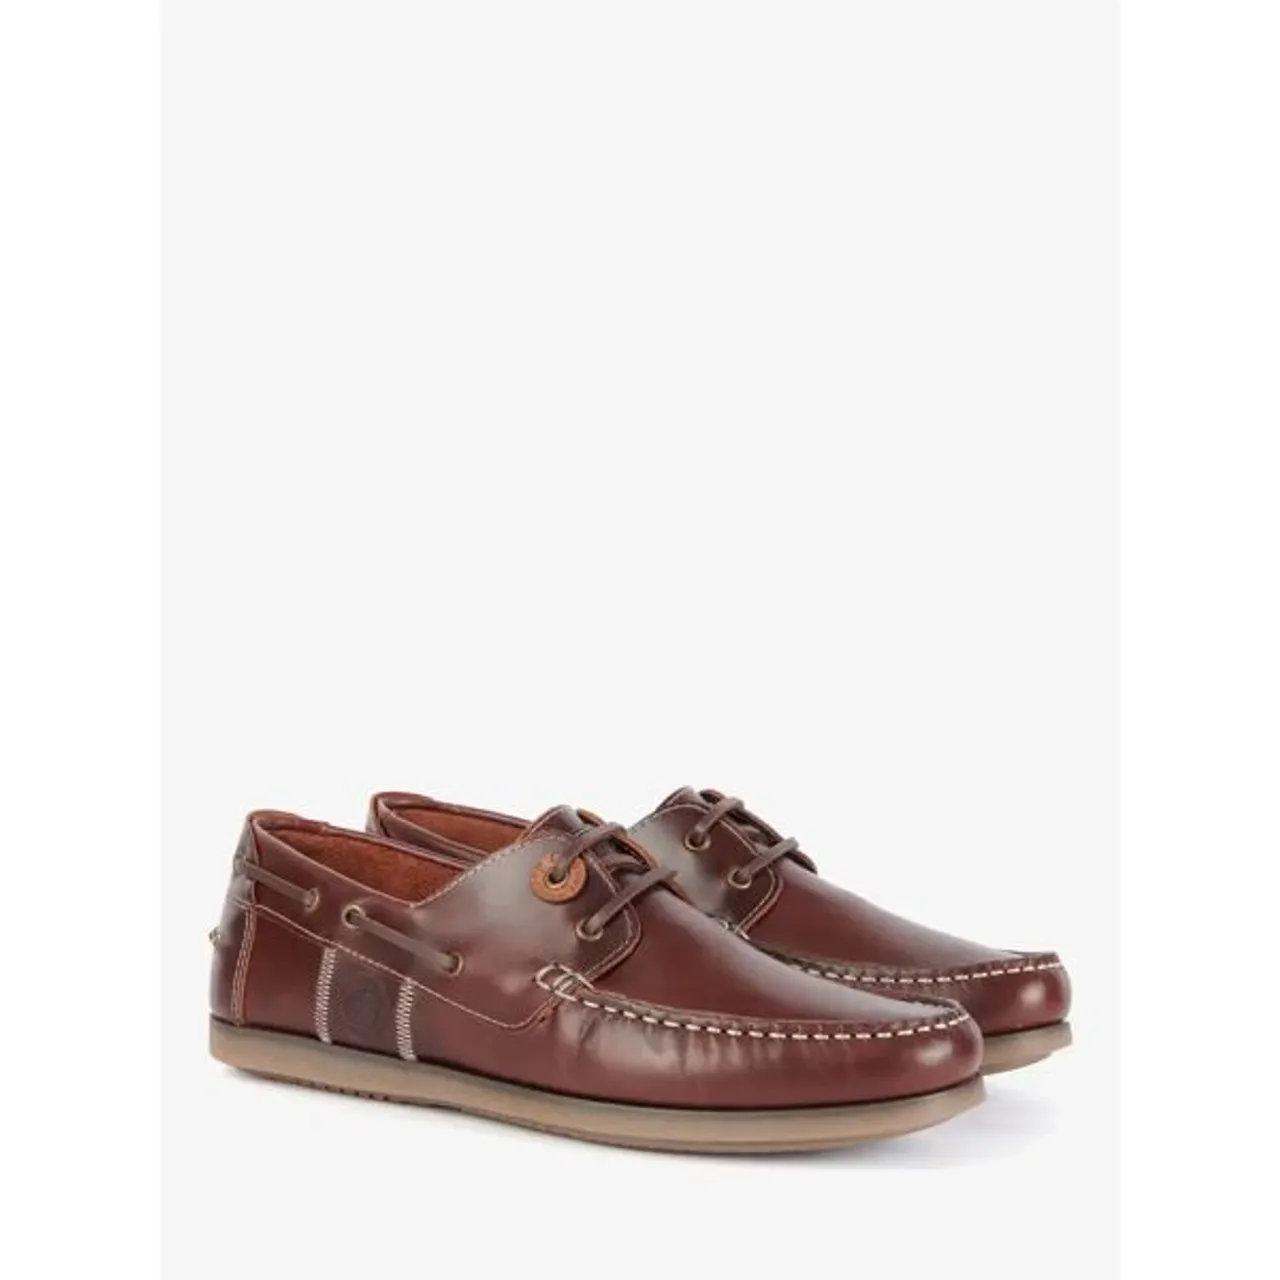 Barbour Wake Leather Boat Shoes - Mahogany - Male